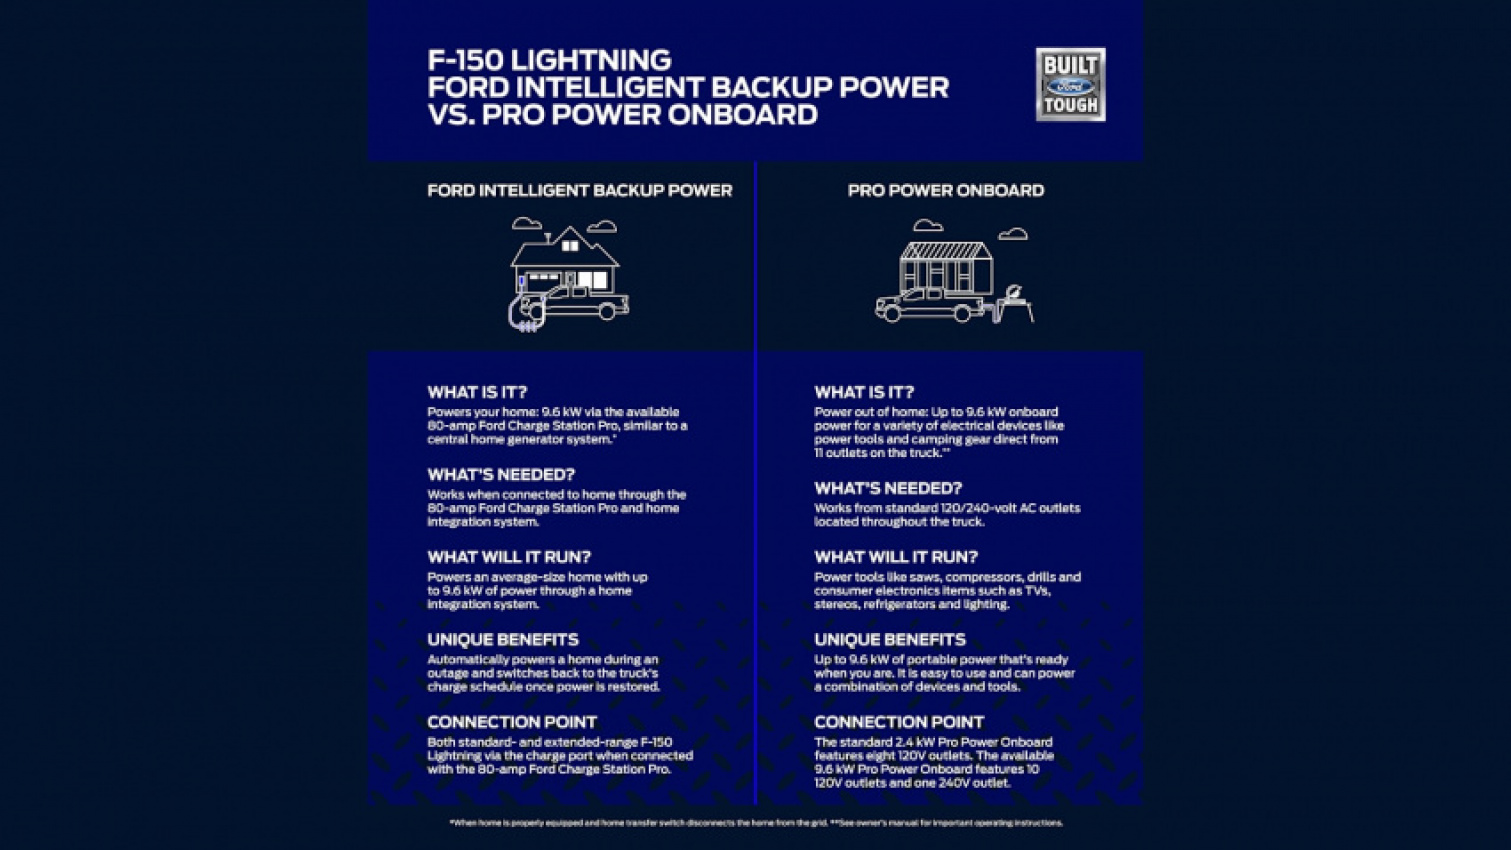 autos, cars, ford, green, electric, ford f-150, future vehicles, green automakers, ownership, technology, truck, new sunrun charger lets ford f-150 lightning power your home